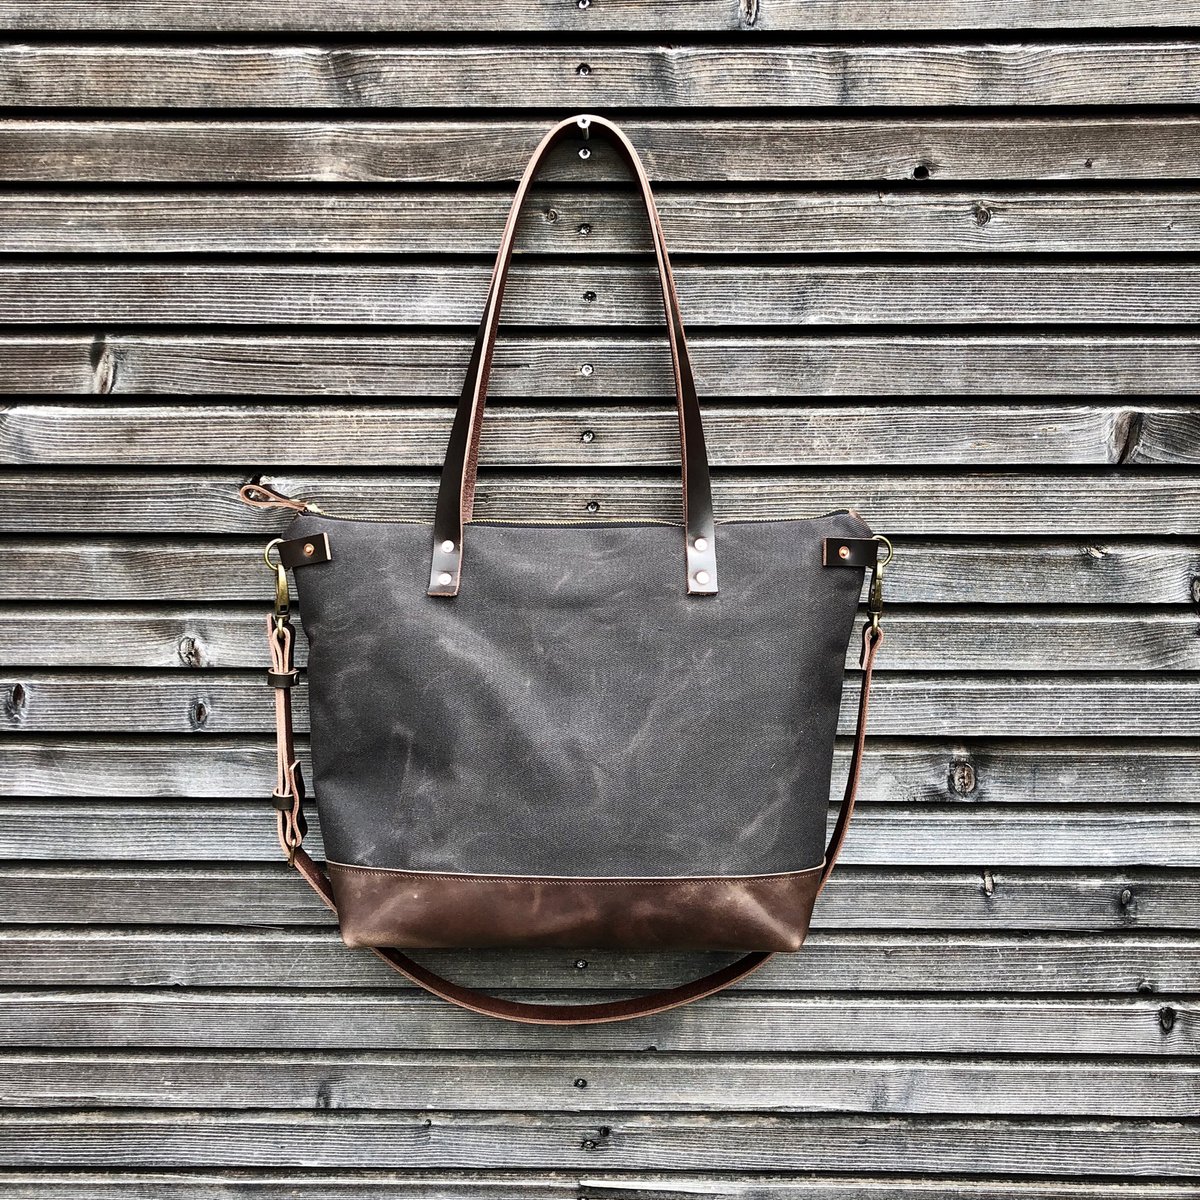 Canvas leather tote bag / carry all / diaper bag with leather handles ...